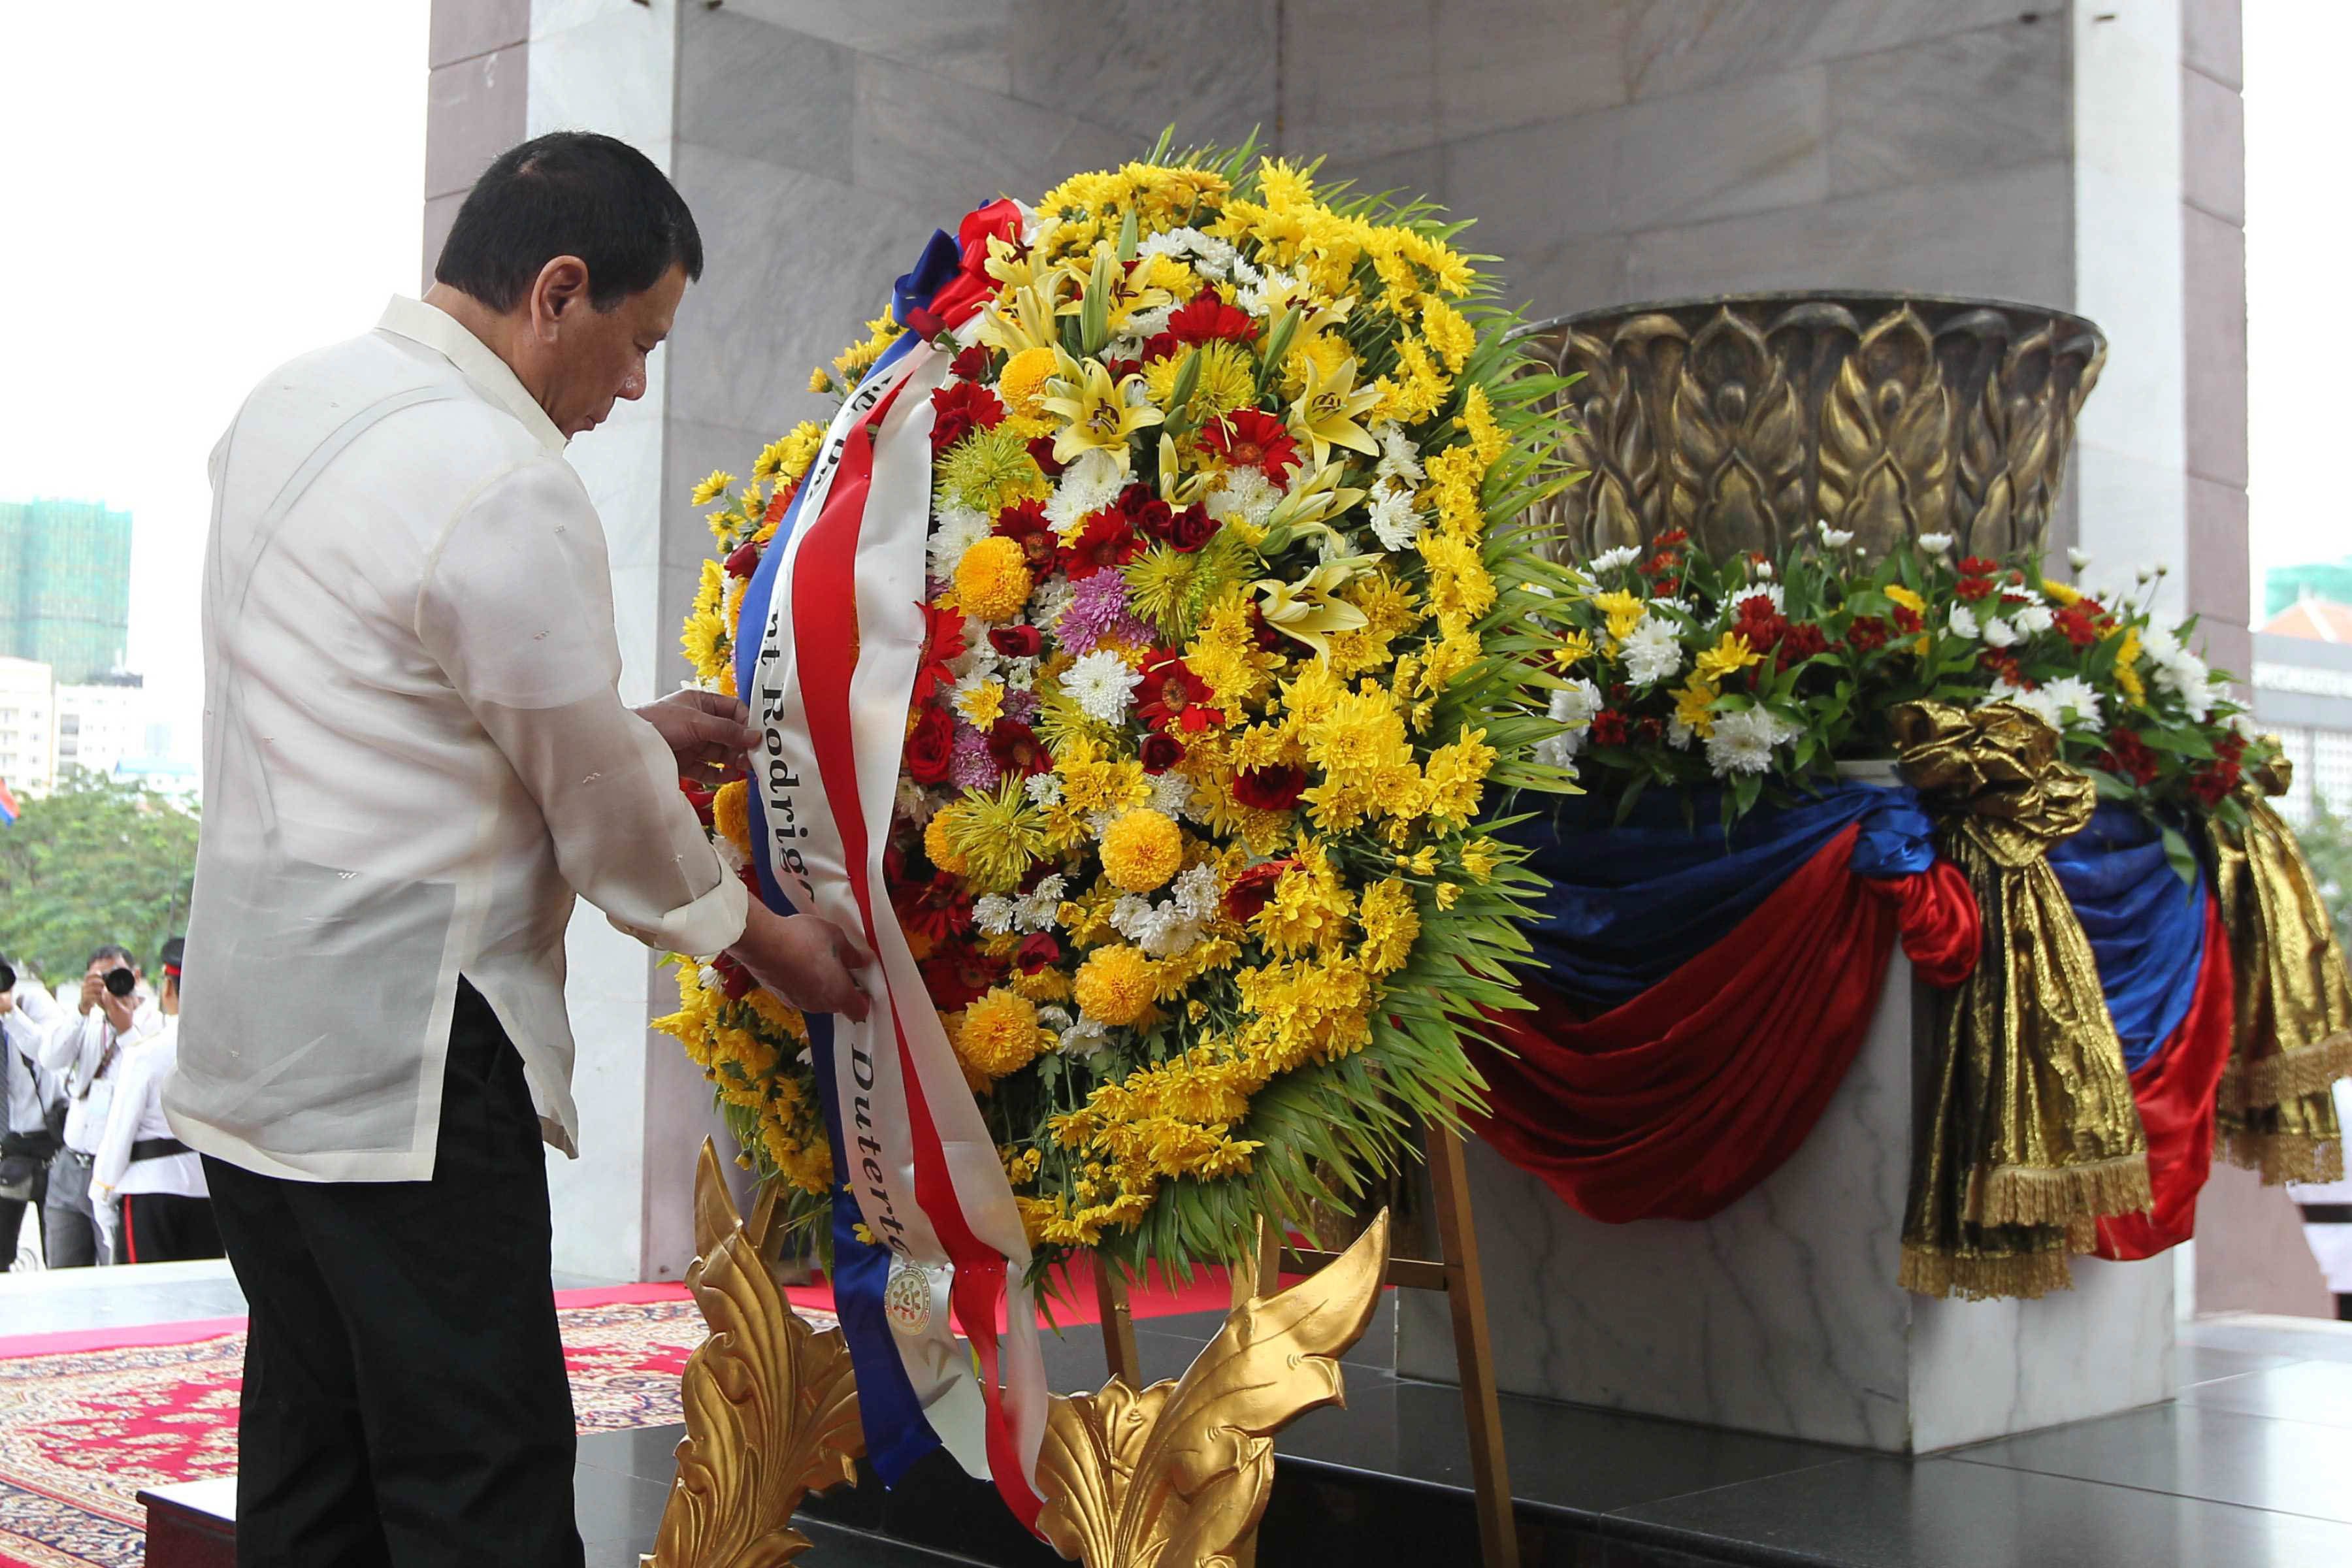 TRIBUTE TO HEROES. President Rodrigo Duterte lays a wreath at the Independence Monument in Cambodia on December 14, 2016 to honor the Cambodians who fought for their country's independence. Photo by Ace Morandante/Presidential Photo  